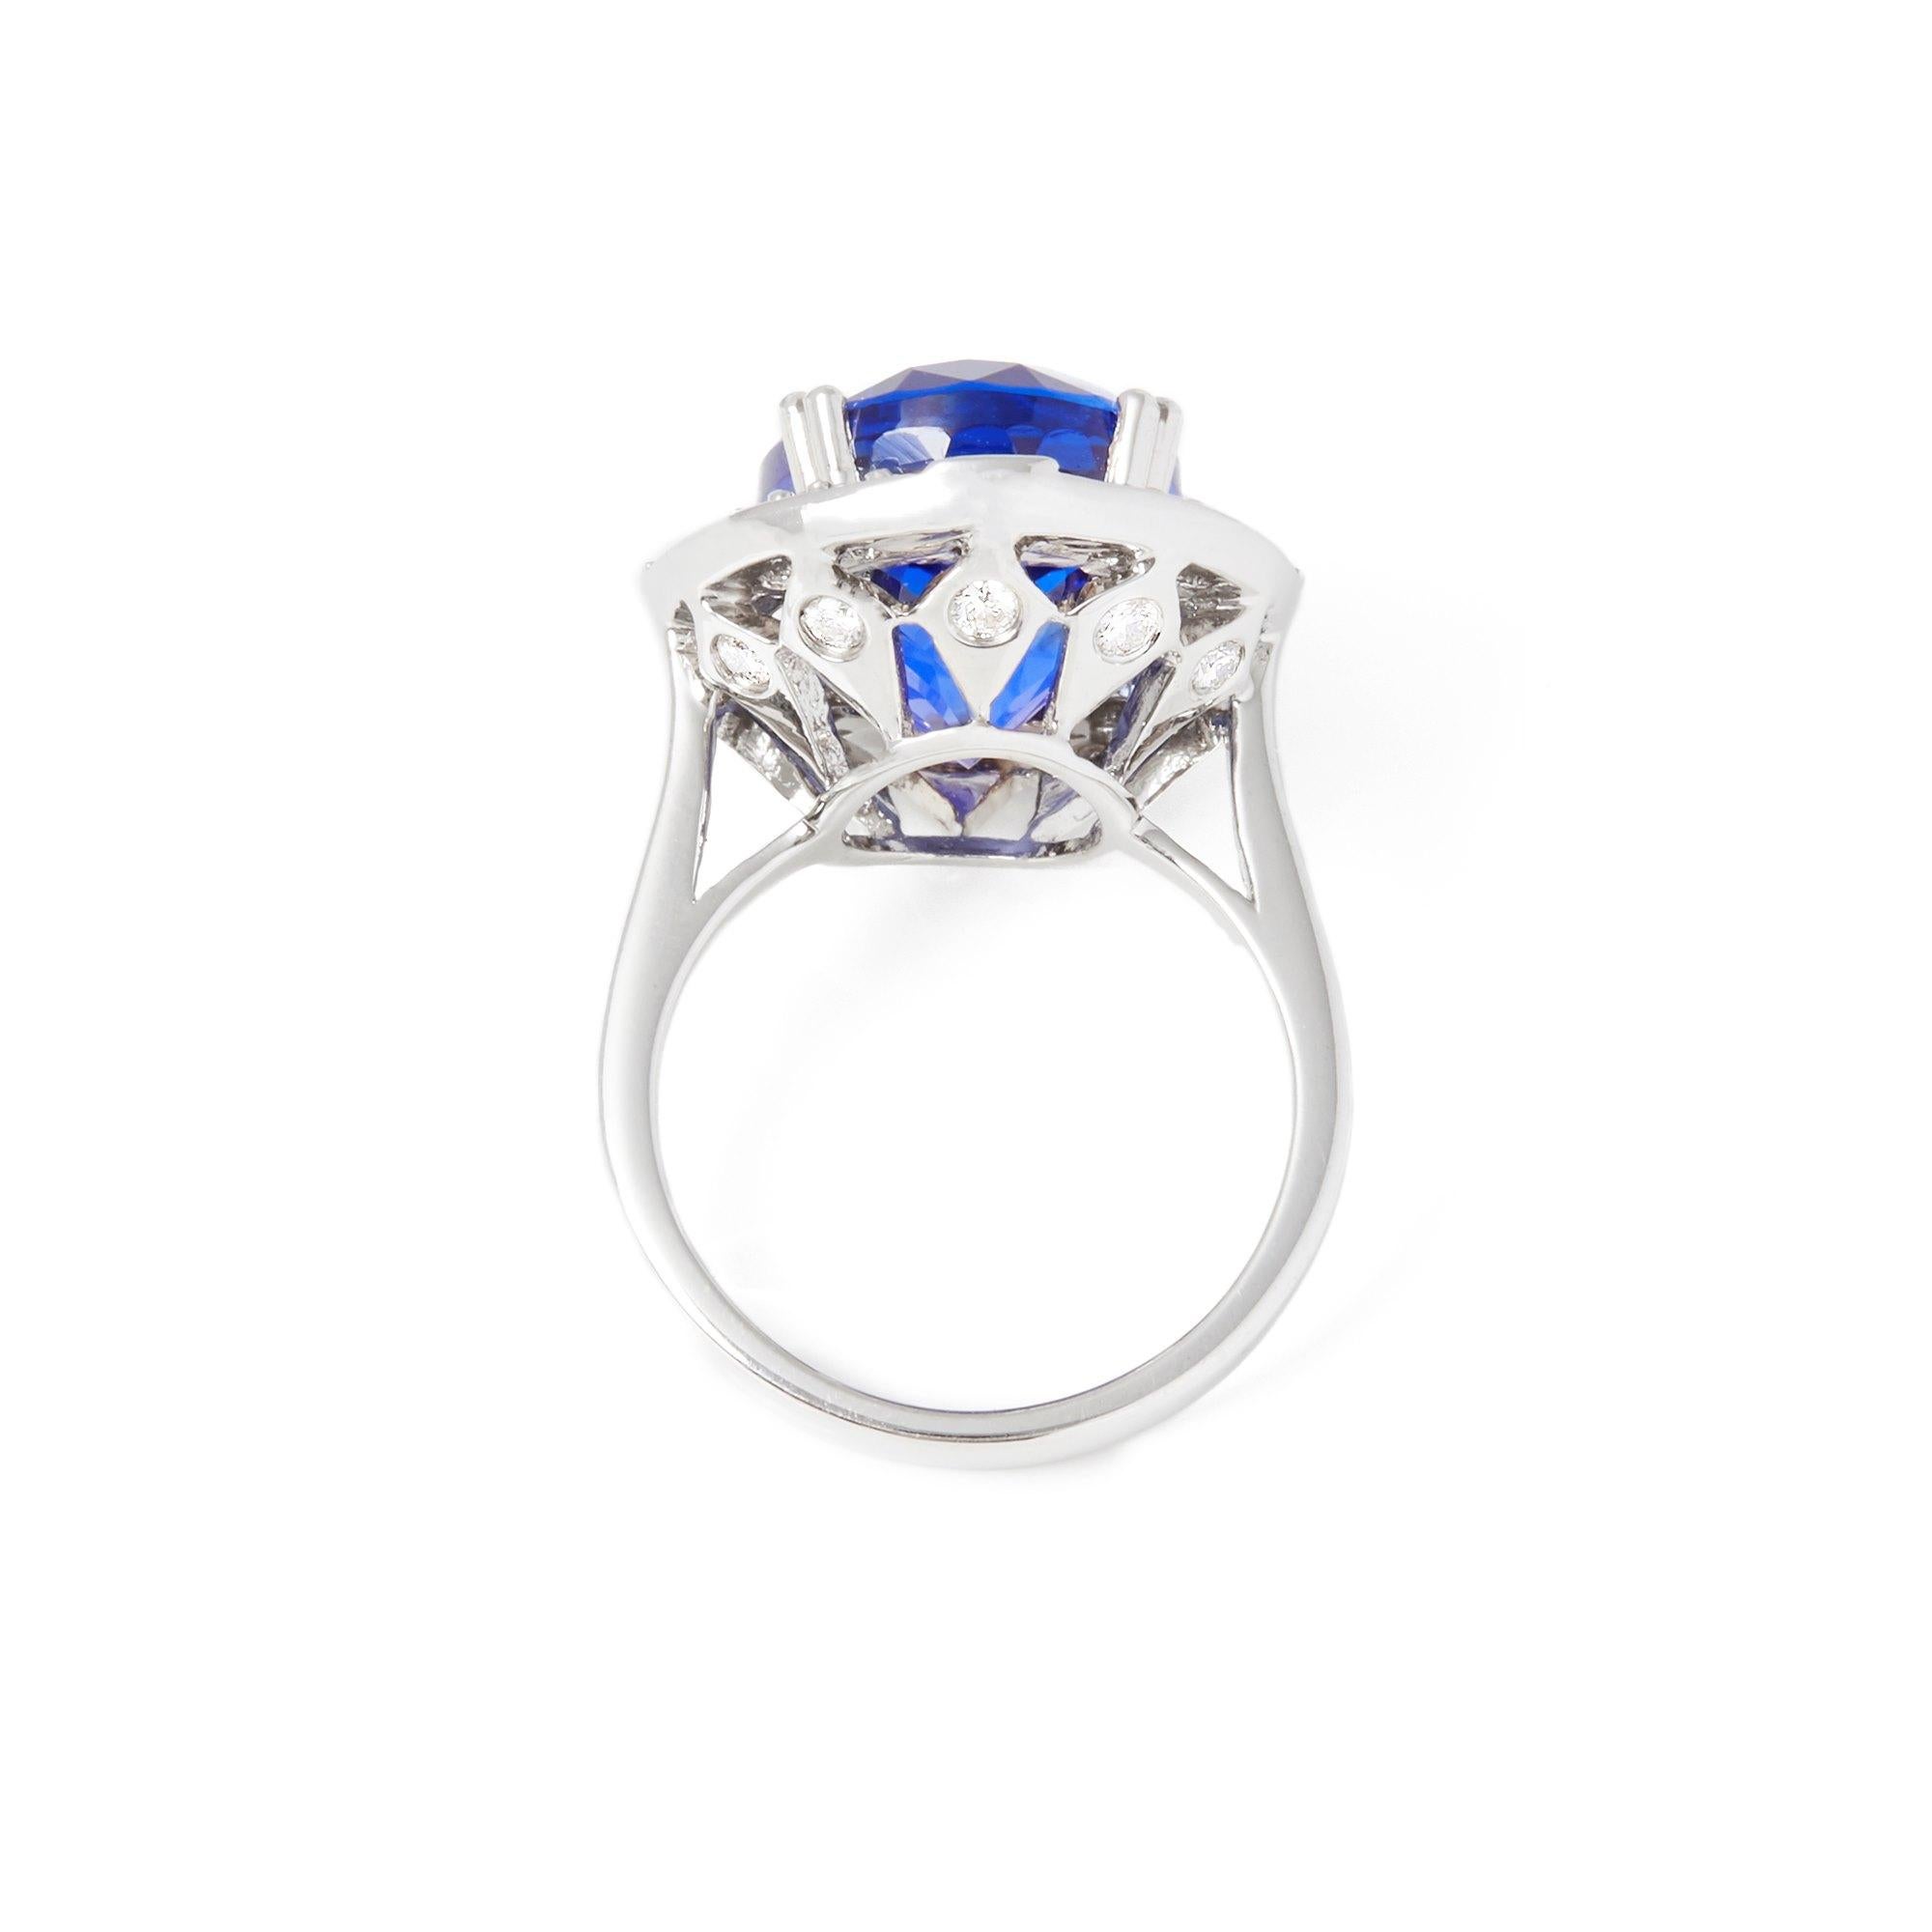 Certified 14.35ct Oval Cut Tanzanite and Diamond 18ct Gold Ring In Excellent Condition For Sale In Bishop's Stortford, Hertfordshire